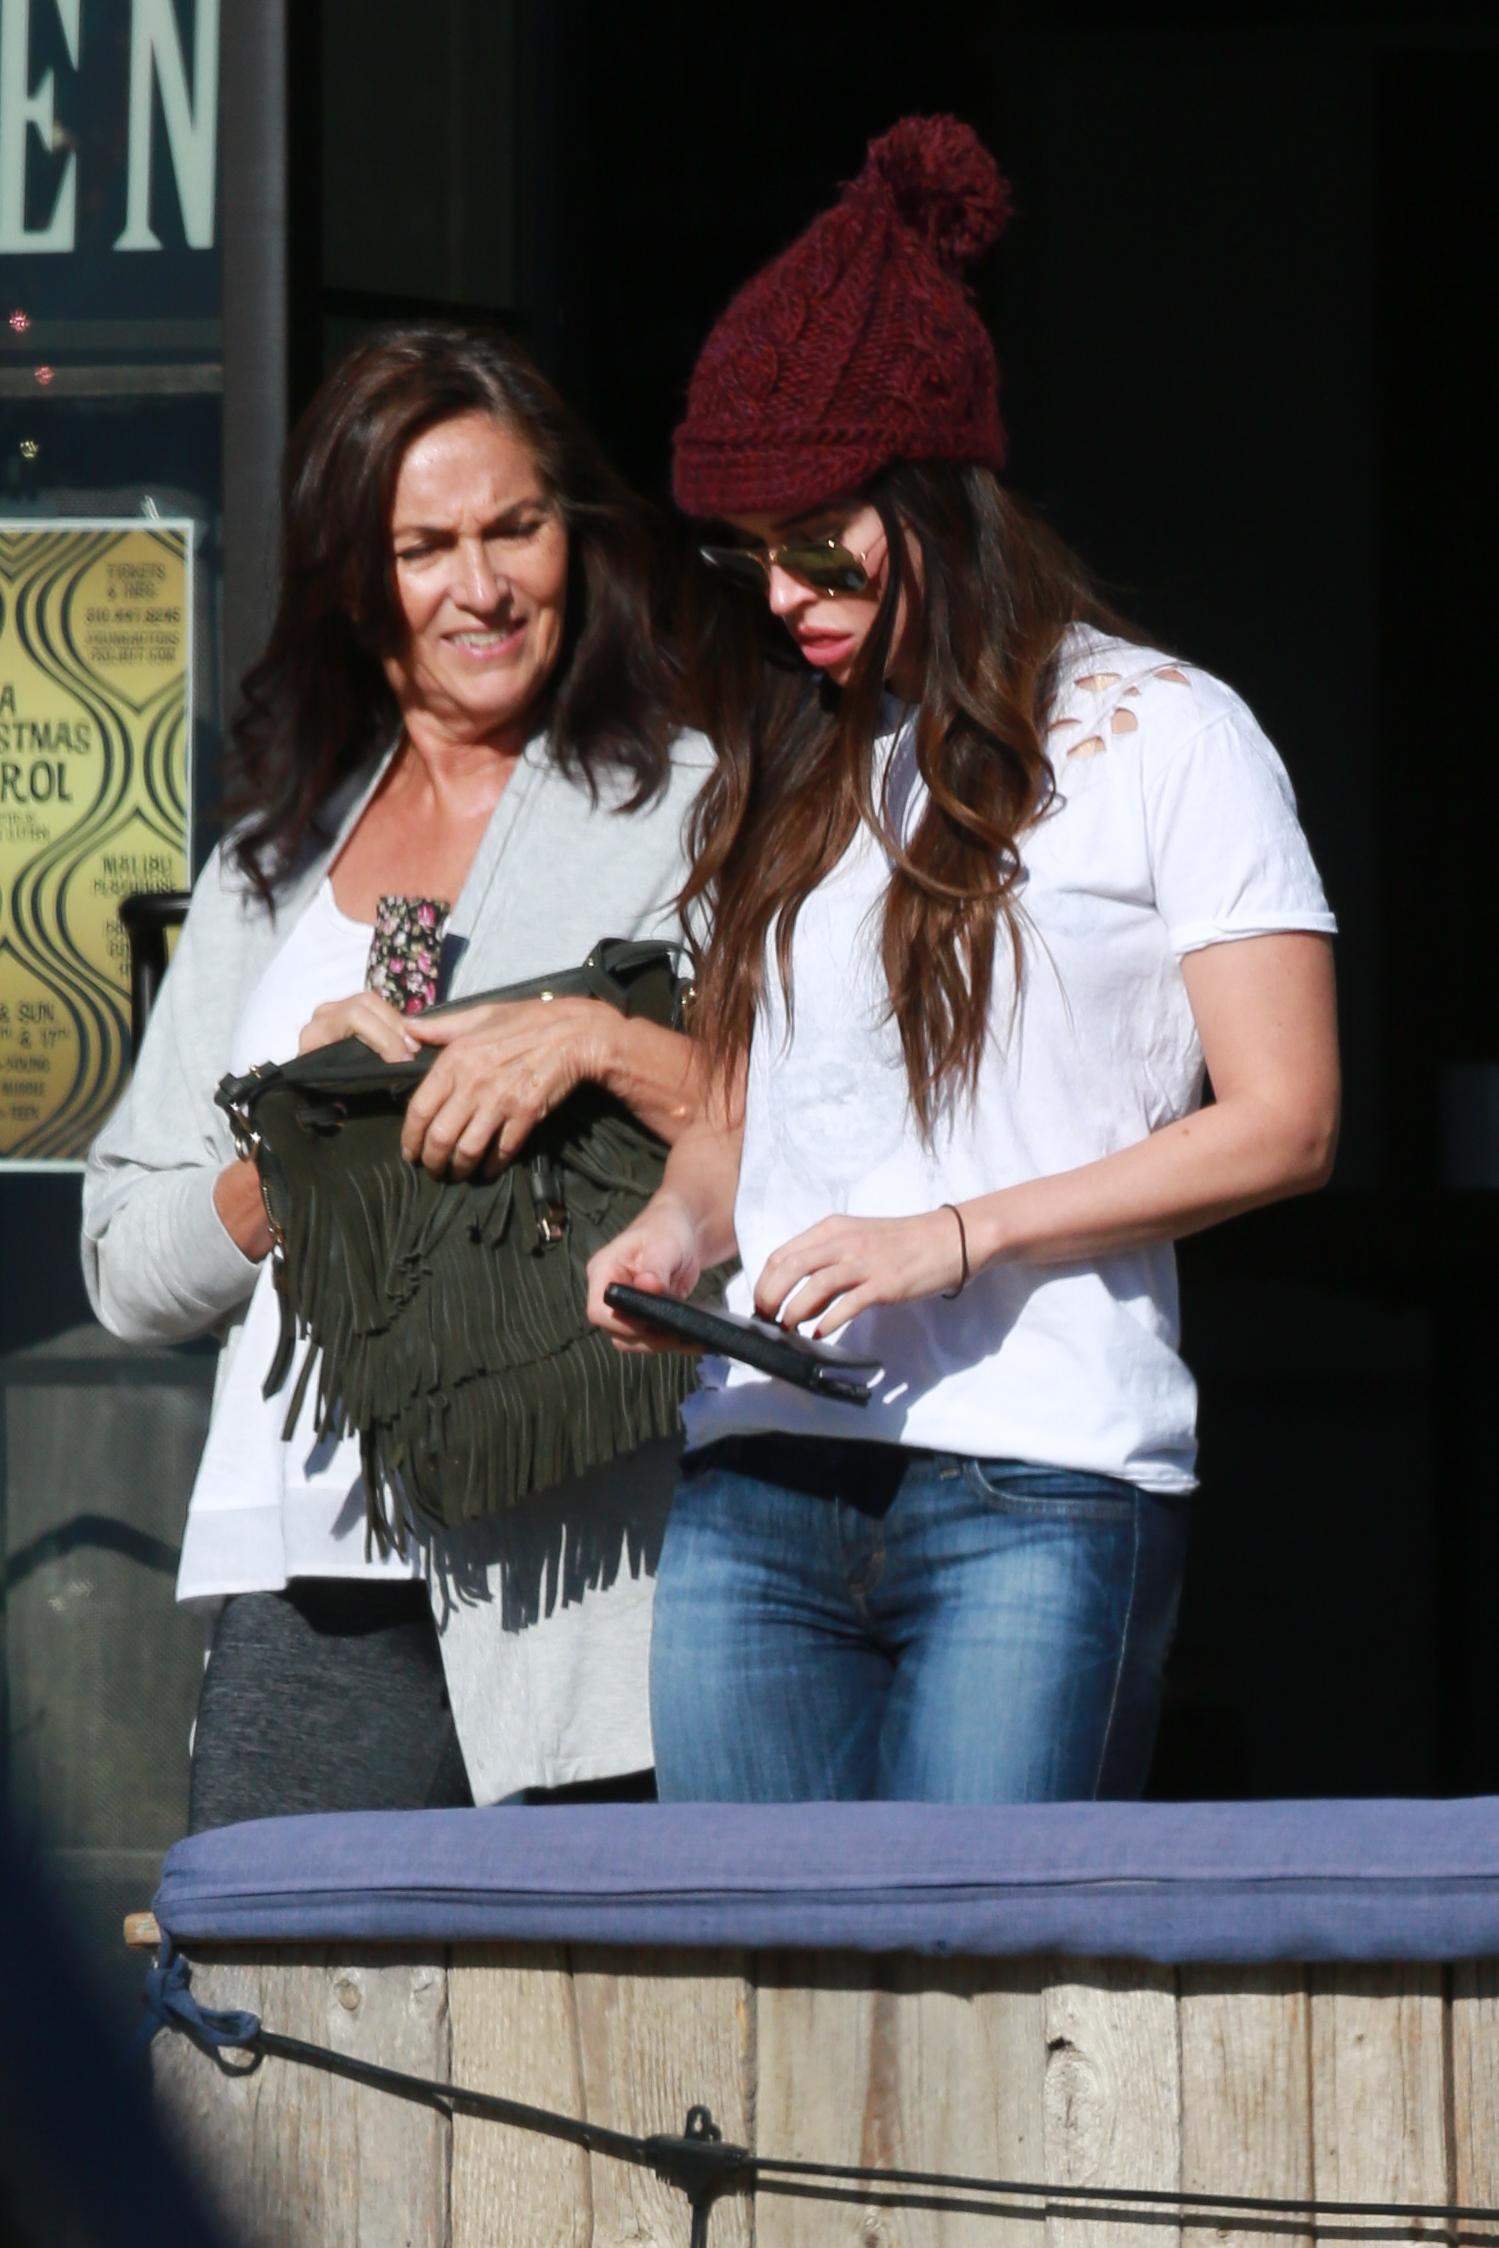 Meeting_Up_With_Her_Mom_for_Lunch_Date_in_Malibu_-_December_13-07.jpg